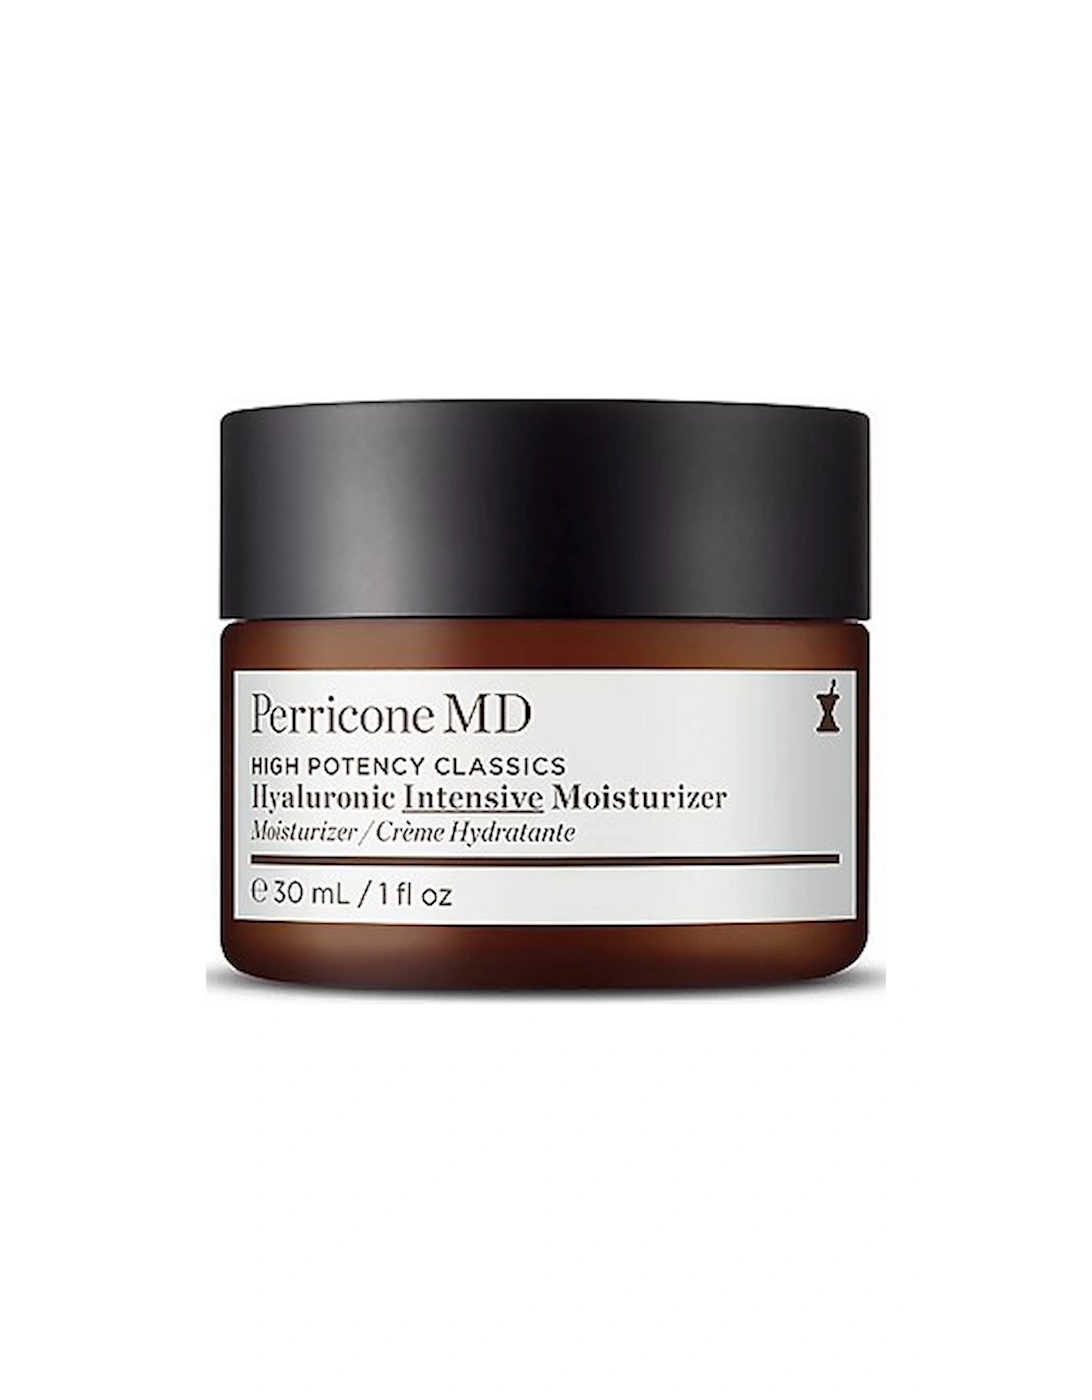 HPC - Hyaluronic Intensive Moisturizer - Perricone MD, 2 of 1